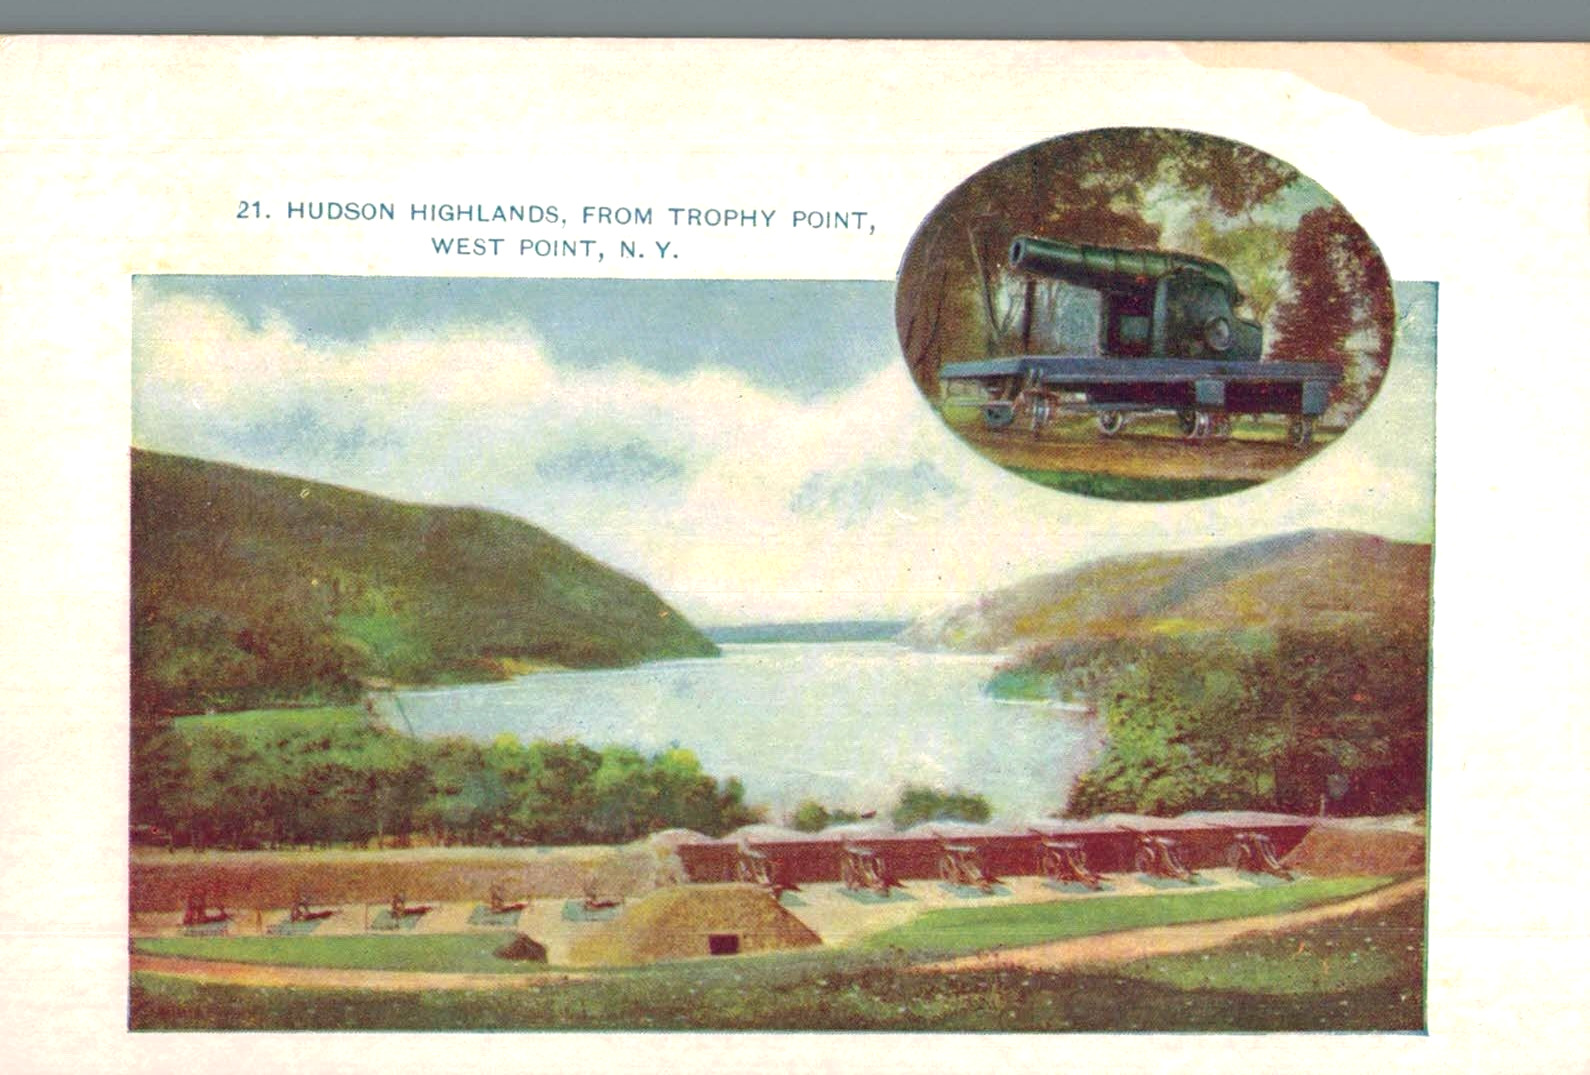 VIntage Postcard-Hudson Highlands,from Trophy Point,West Point, NY, Canon insert